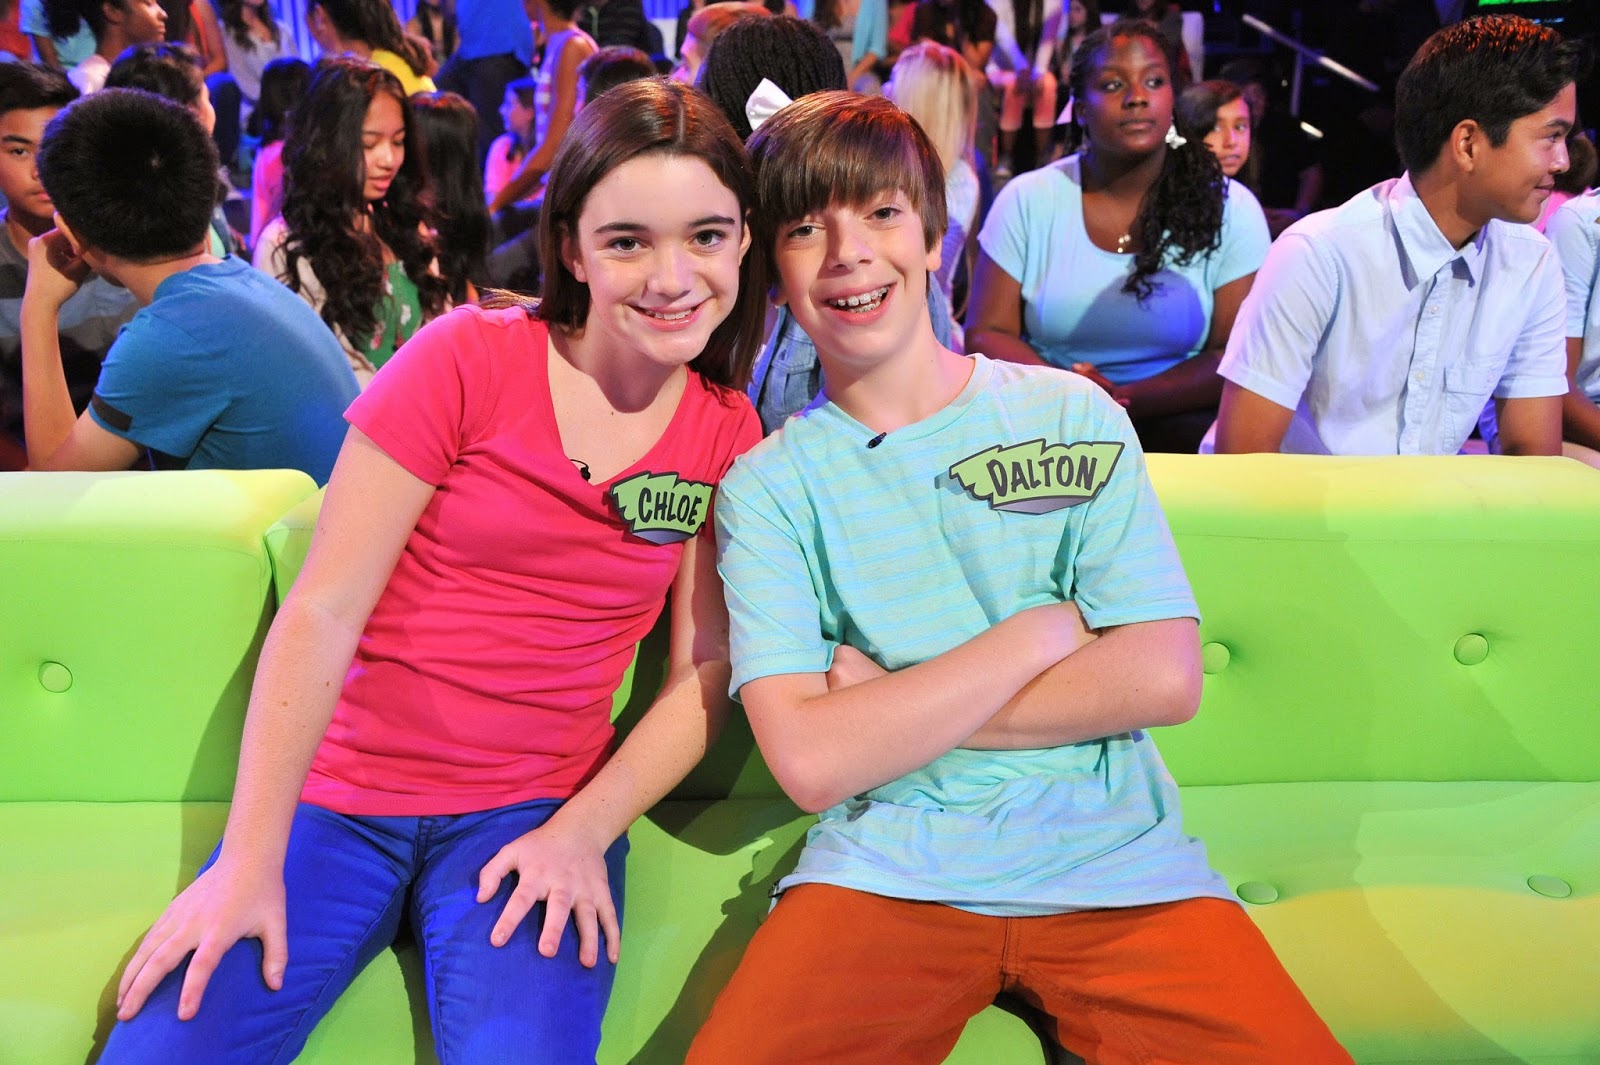 Chloe and her brother Dalton on Disney's Win Lose or Draw with Cameron Boyce and Peyton List